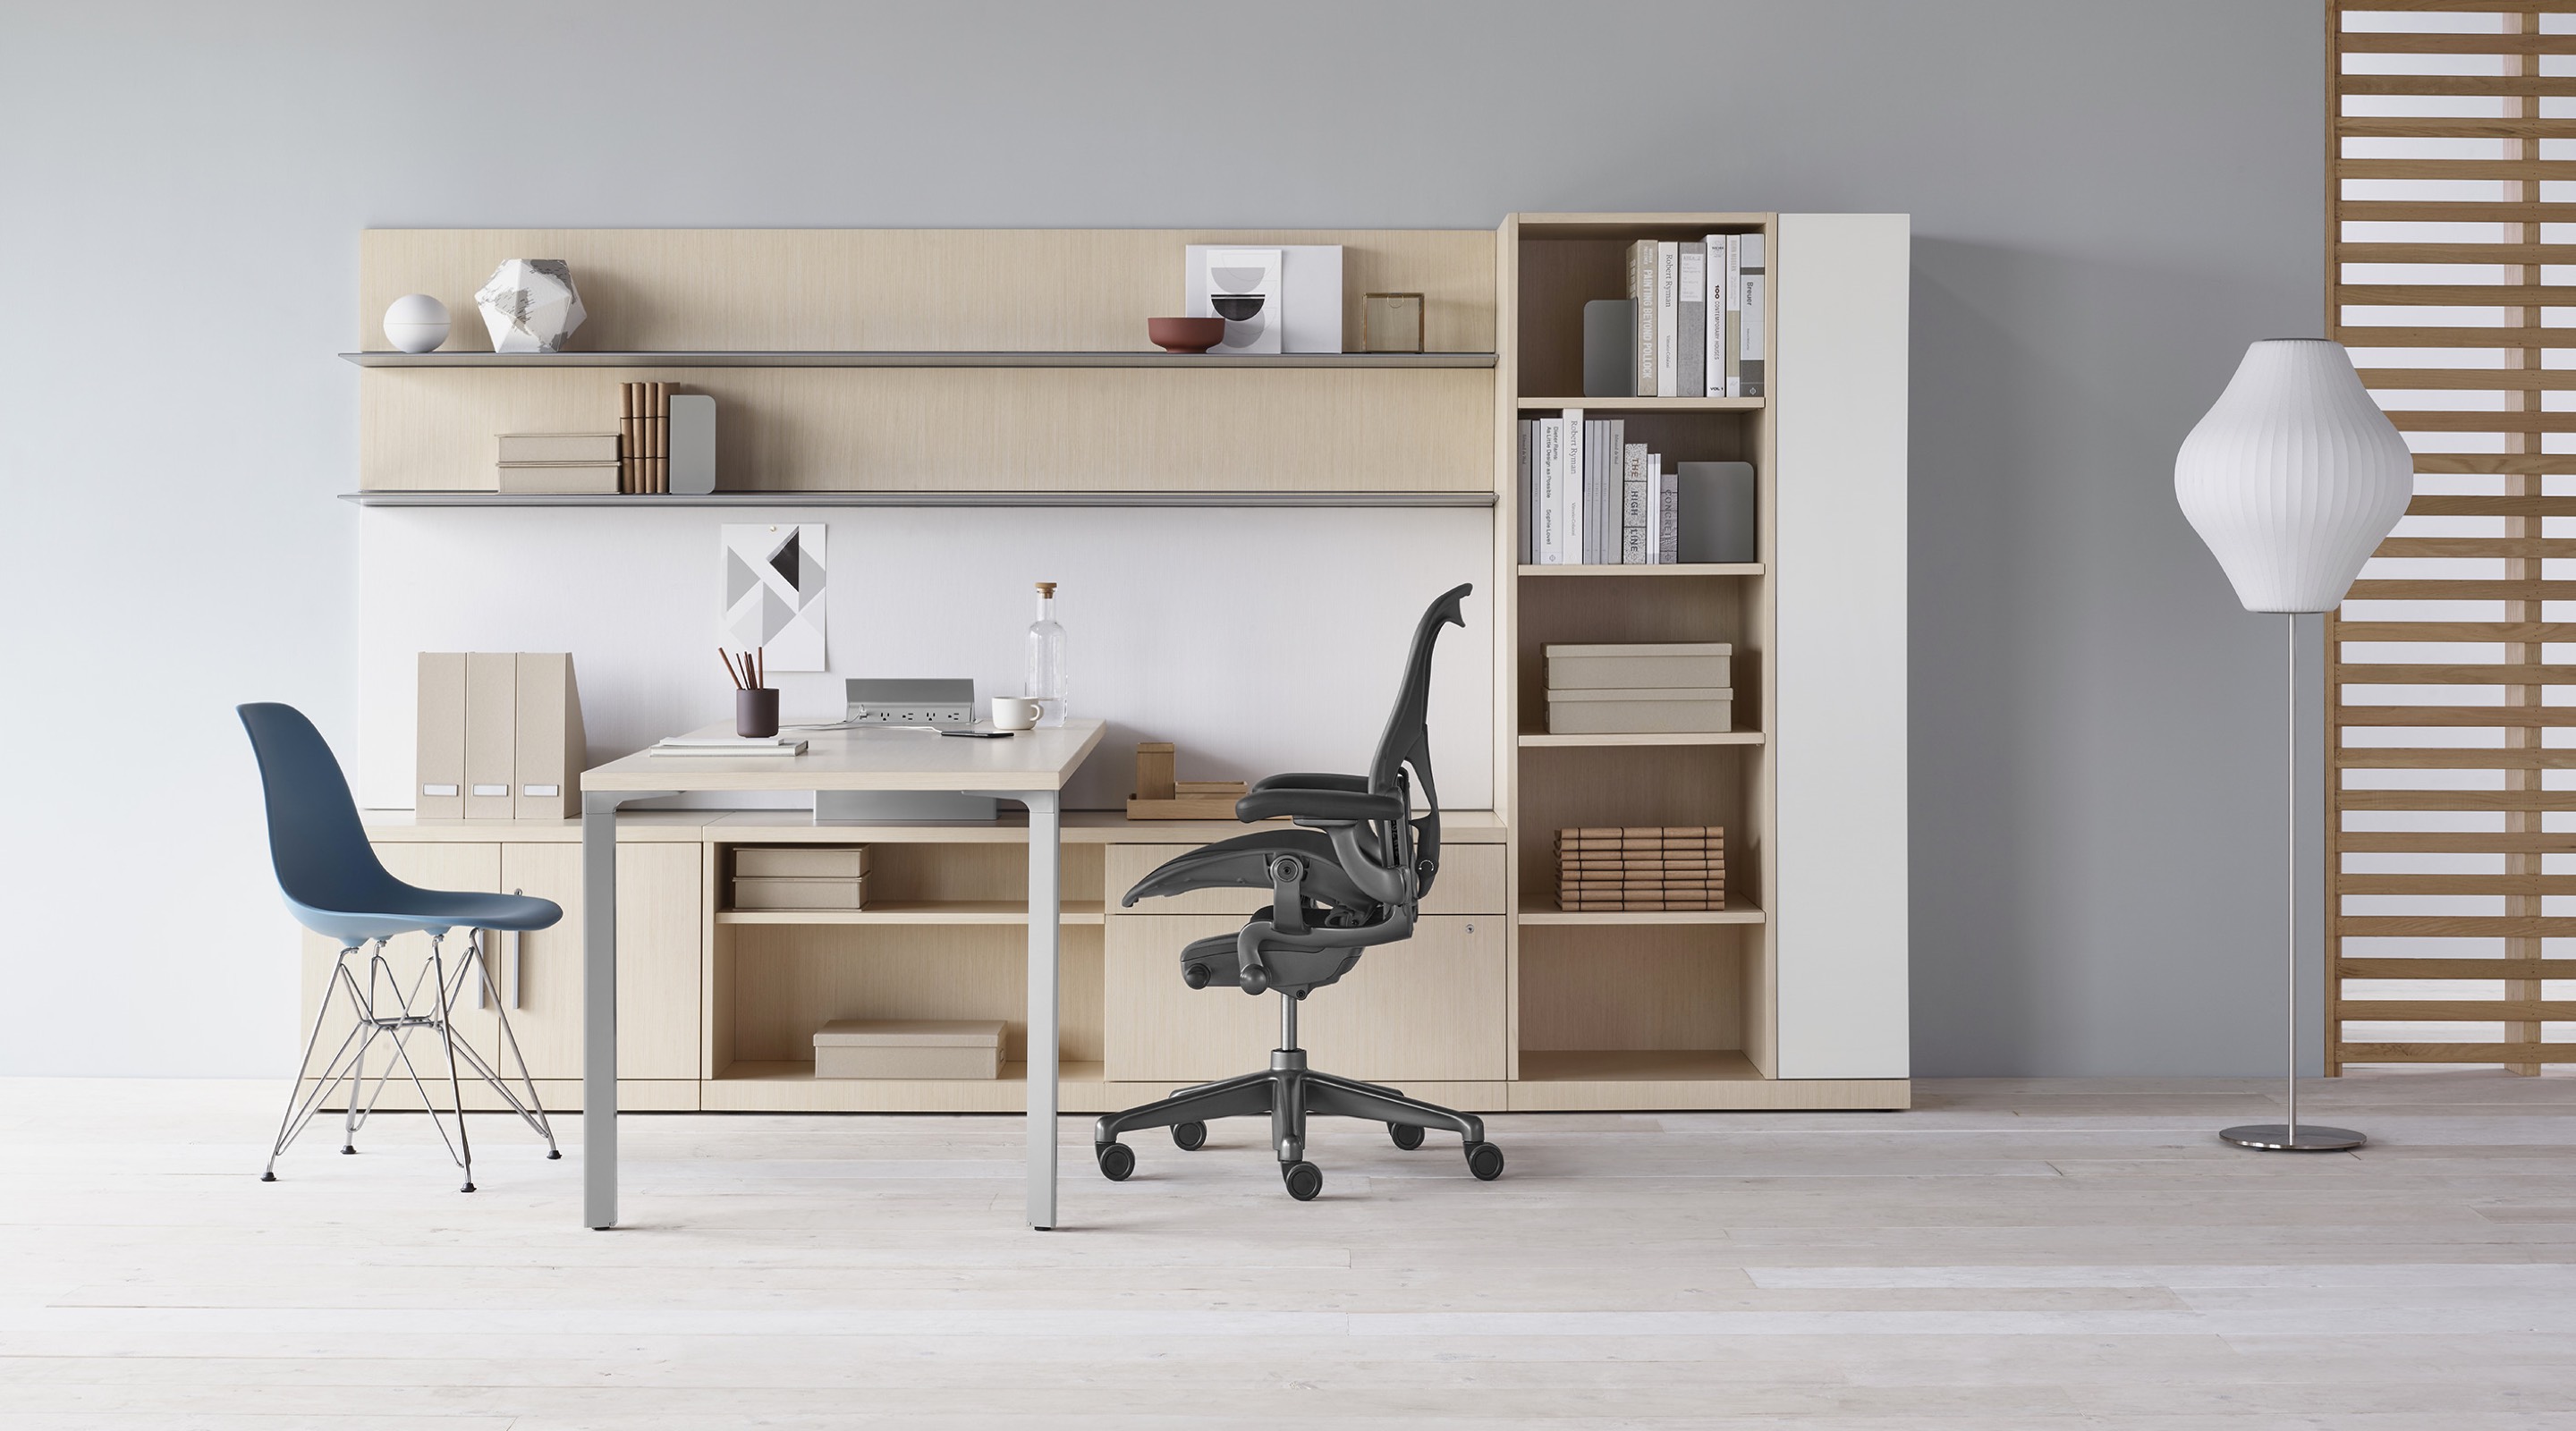 https://www.hermanmiller.com/content/dam/hmicom/page_assets/products/canvas_office_landscape/lookbook/private_workspaces/setting_1/ebr_can_private_workspaces_setting_1.jpg